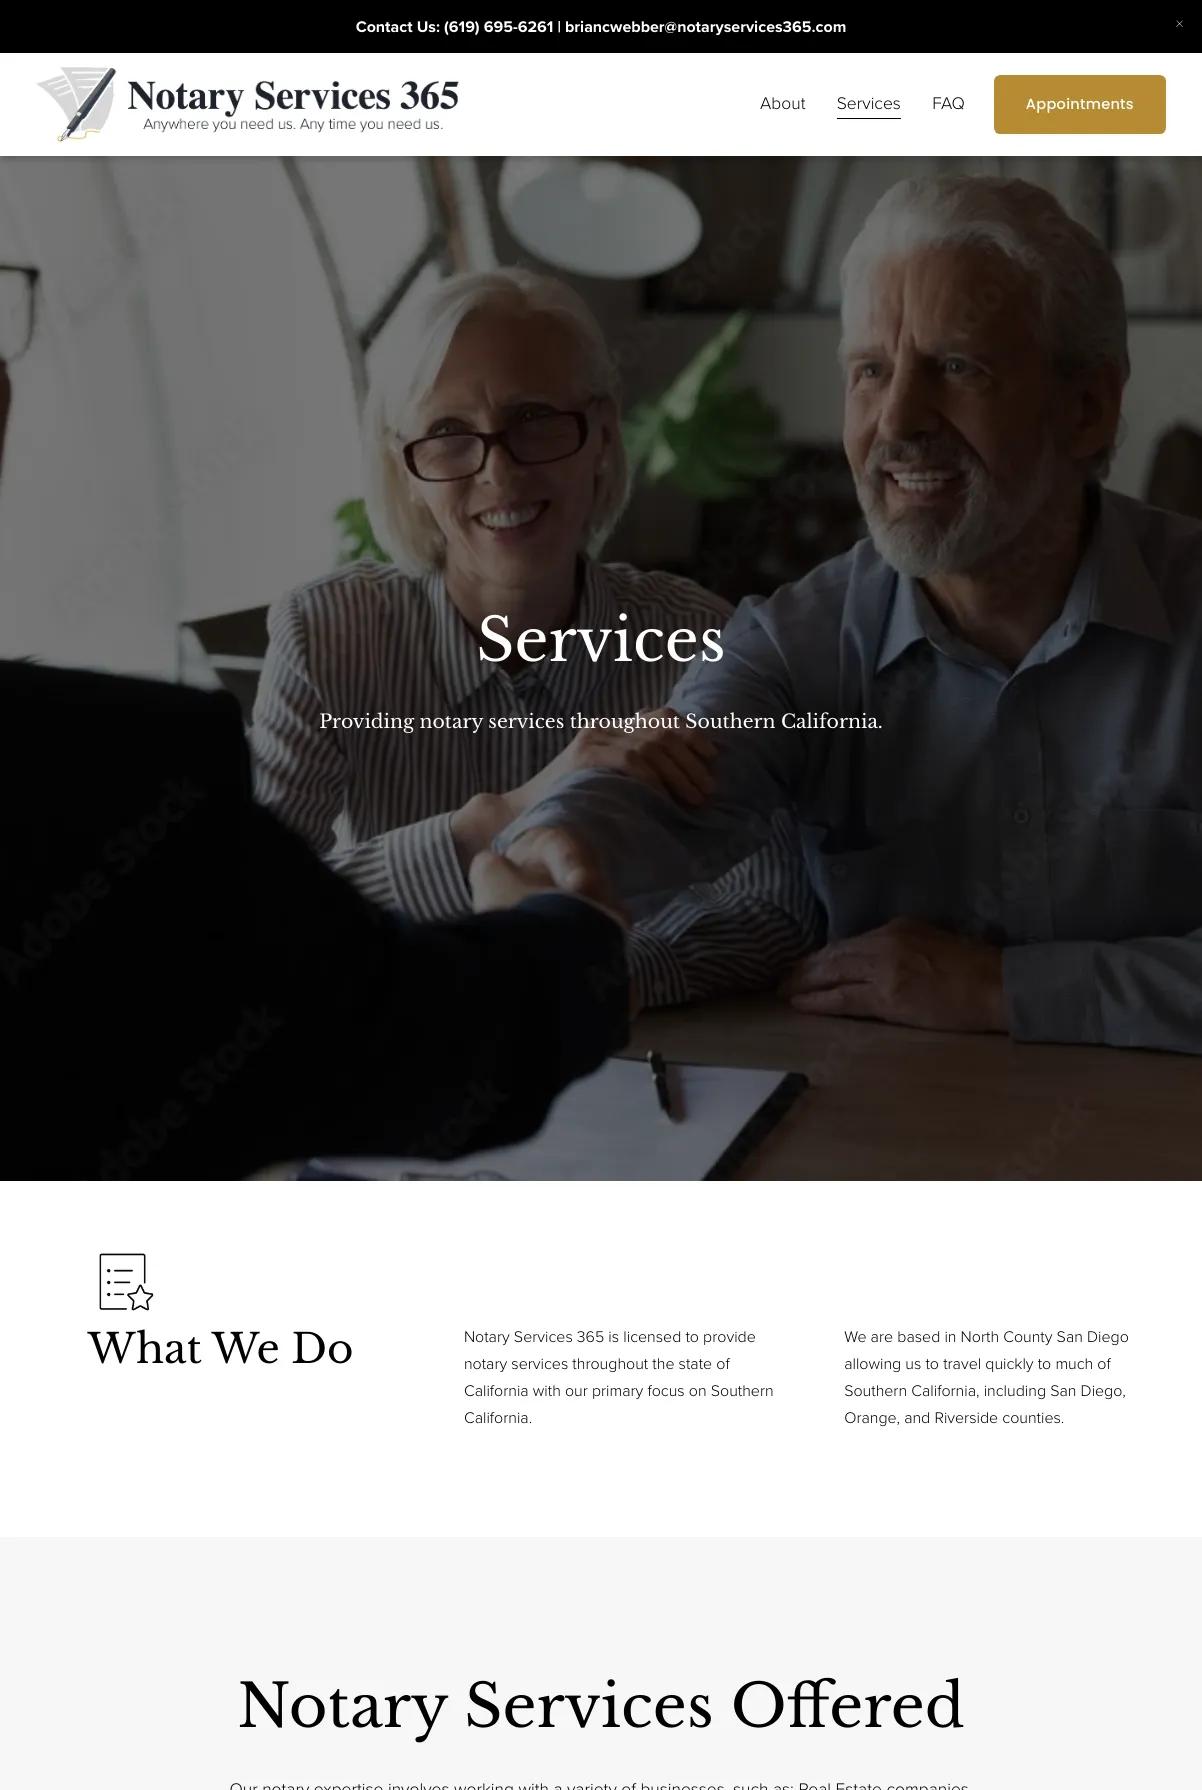 Screenshot 3 of Notary Services 365 (Example Squarespace Notary Website)